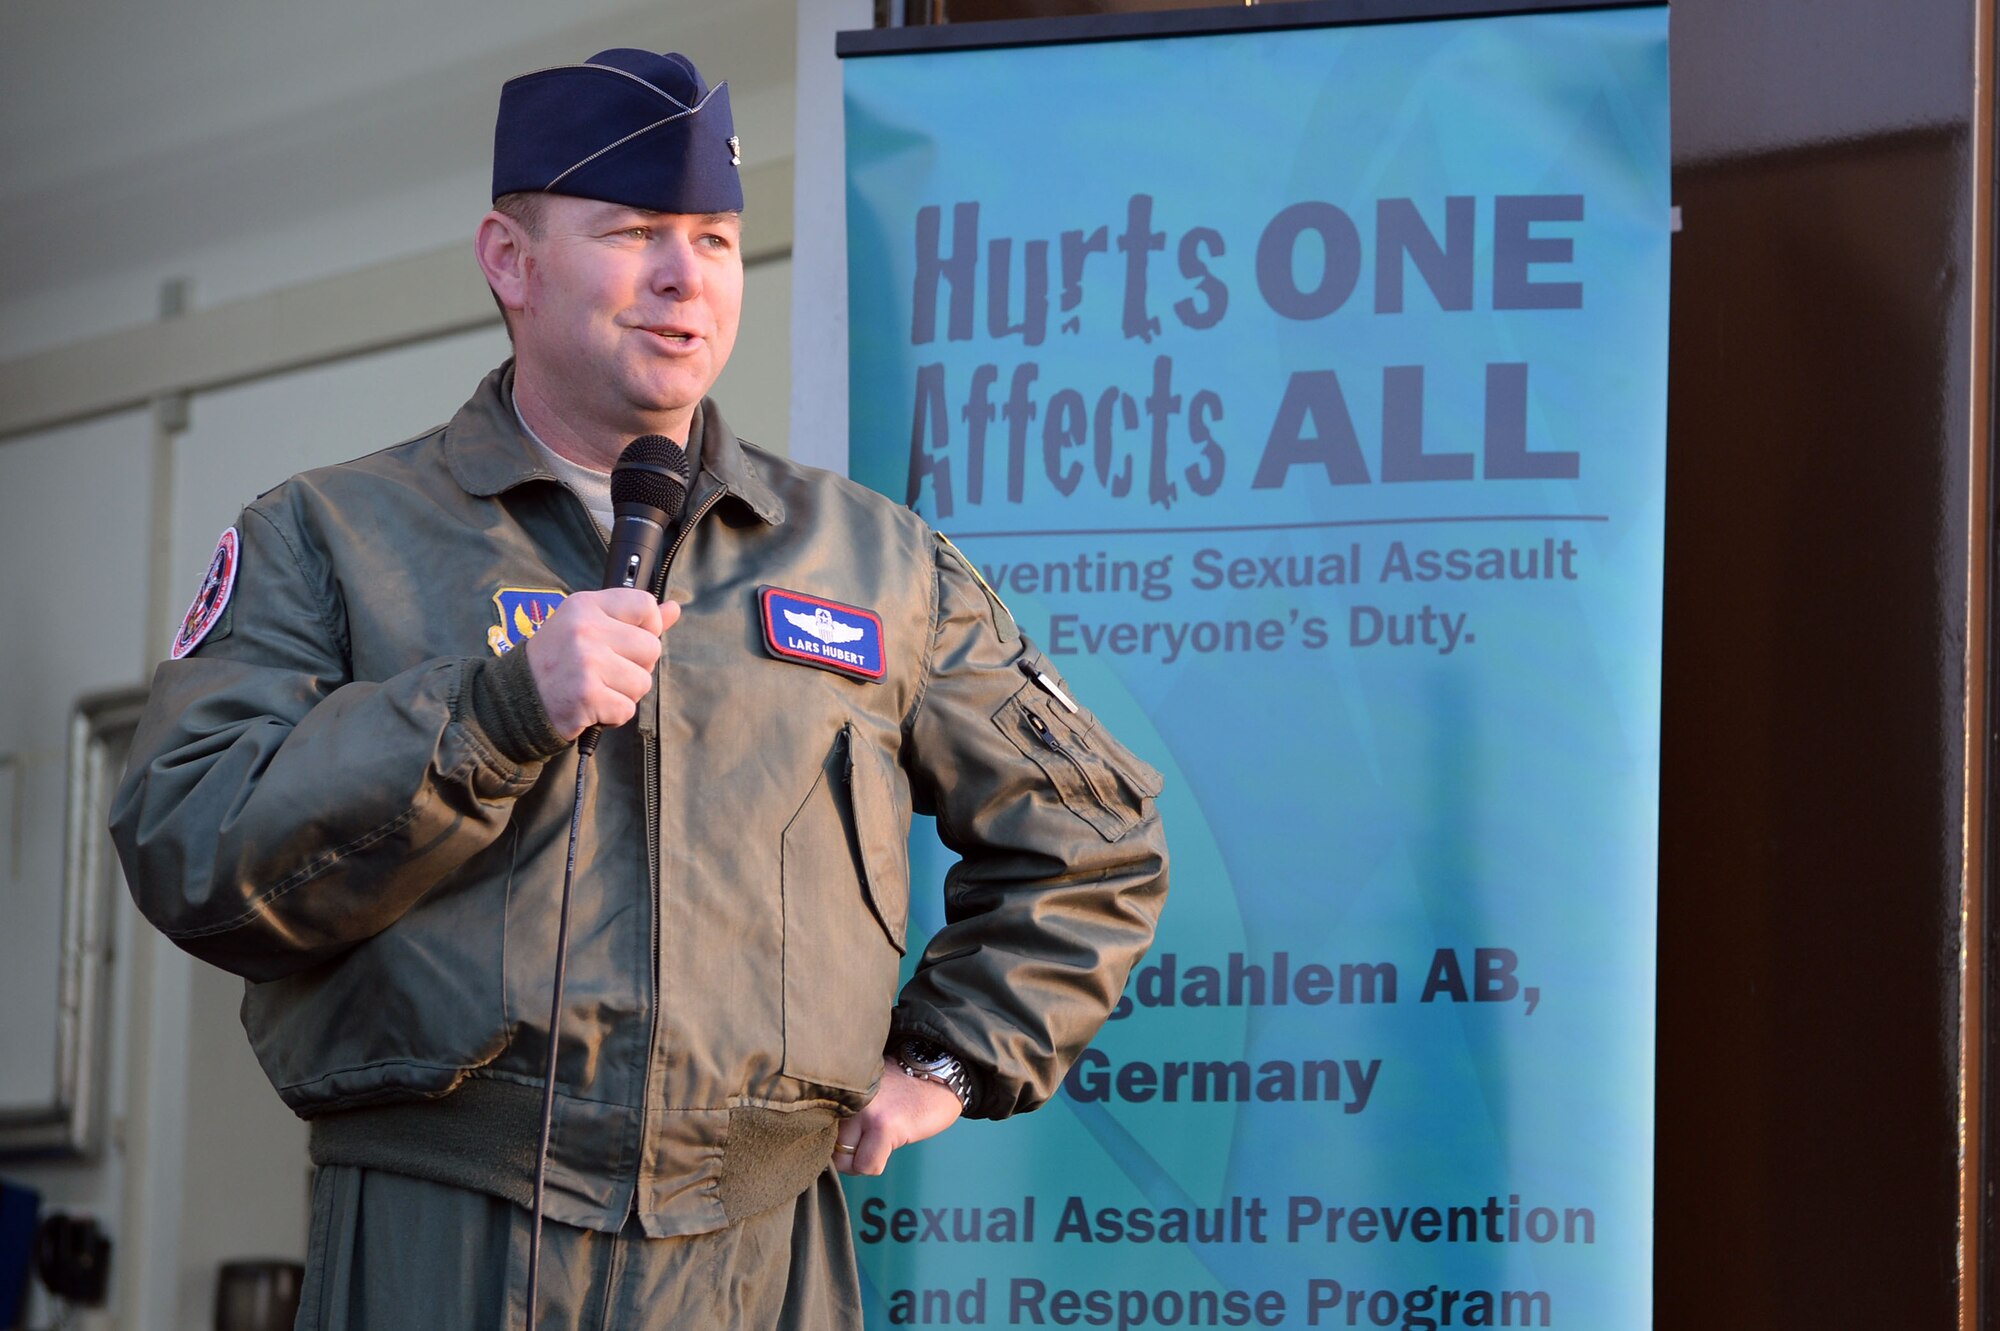 U.S. Air Force Col. Lars Hubert, 52nd Fighter Wing vice commander, makes opening remarks before a wing-wide 5K fun run for Sexual Assault Awareness Month at Spangdahlem Air Base, Germany, April 2, 2014. More than 100 runners attended the race. (U.S. Air Force photo by Senior Airman Alexis Siekert/Released)